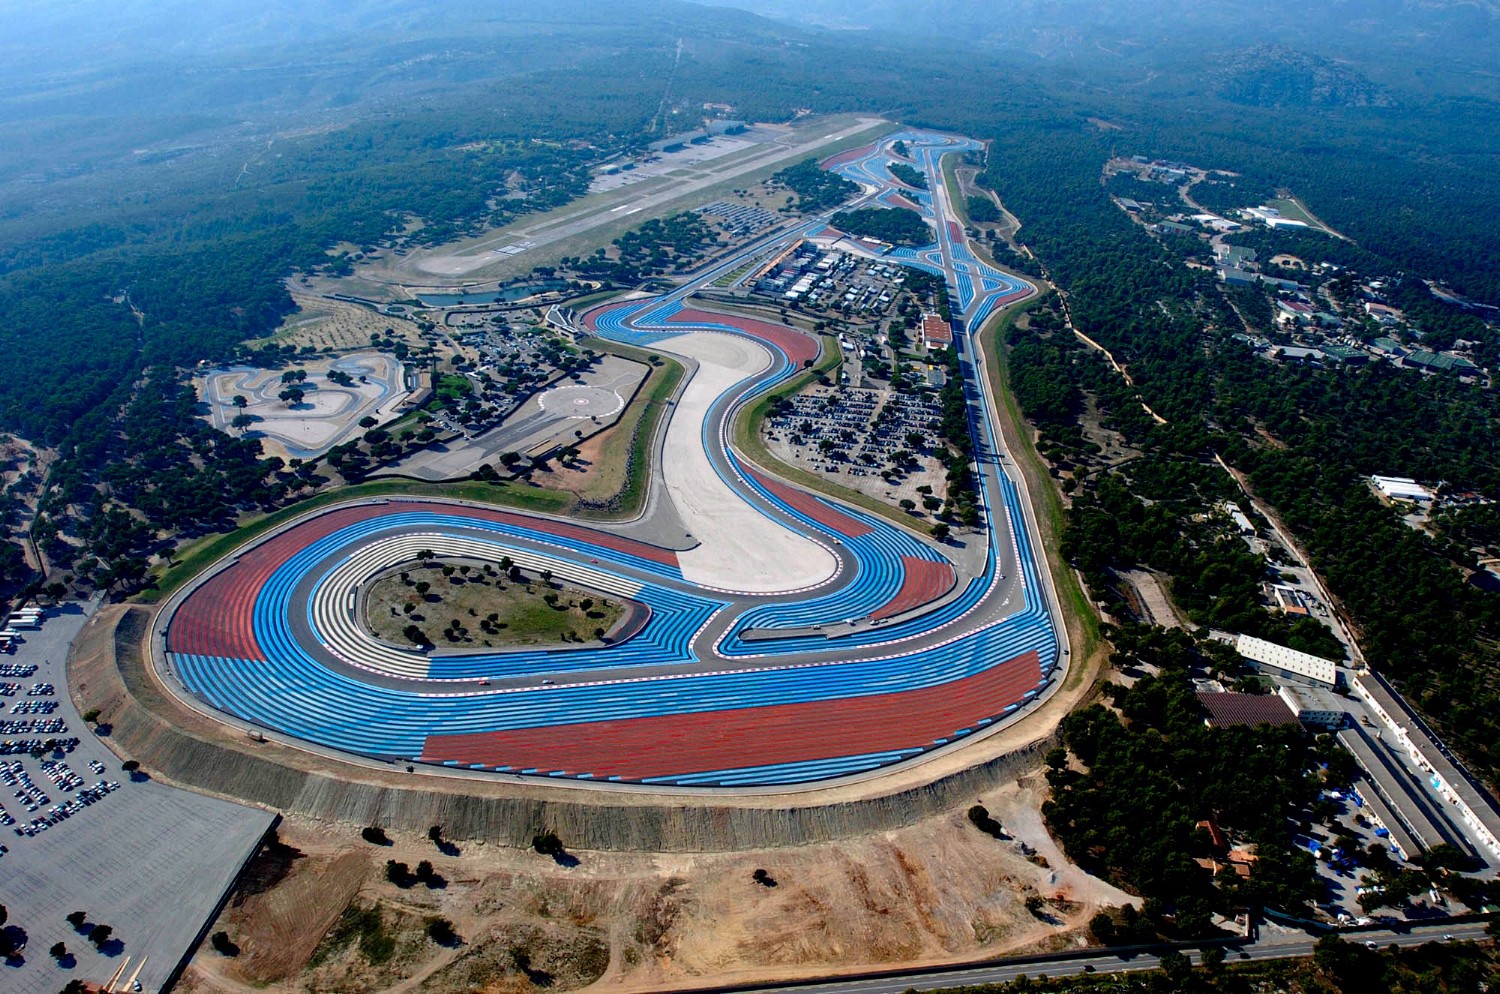 Paul Ricard has had a chicane in the long baackstraight (Mistral Straight) for years. The chicane was not just added.